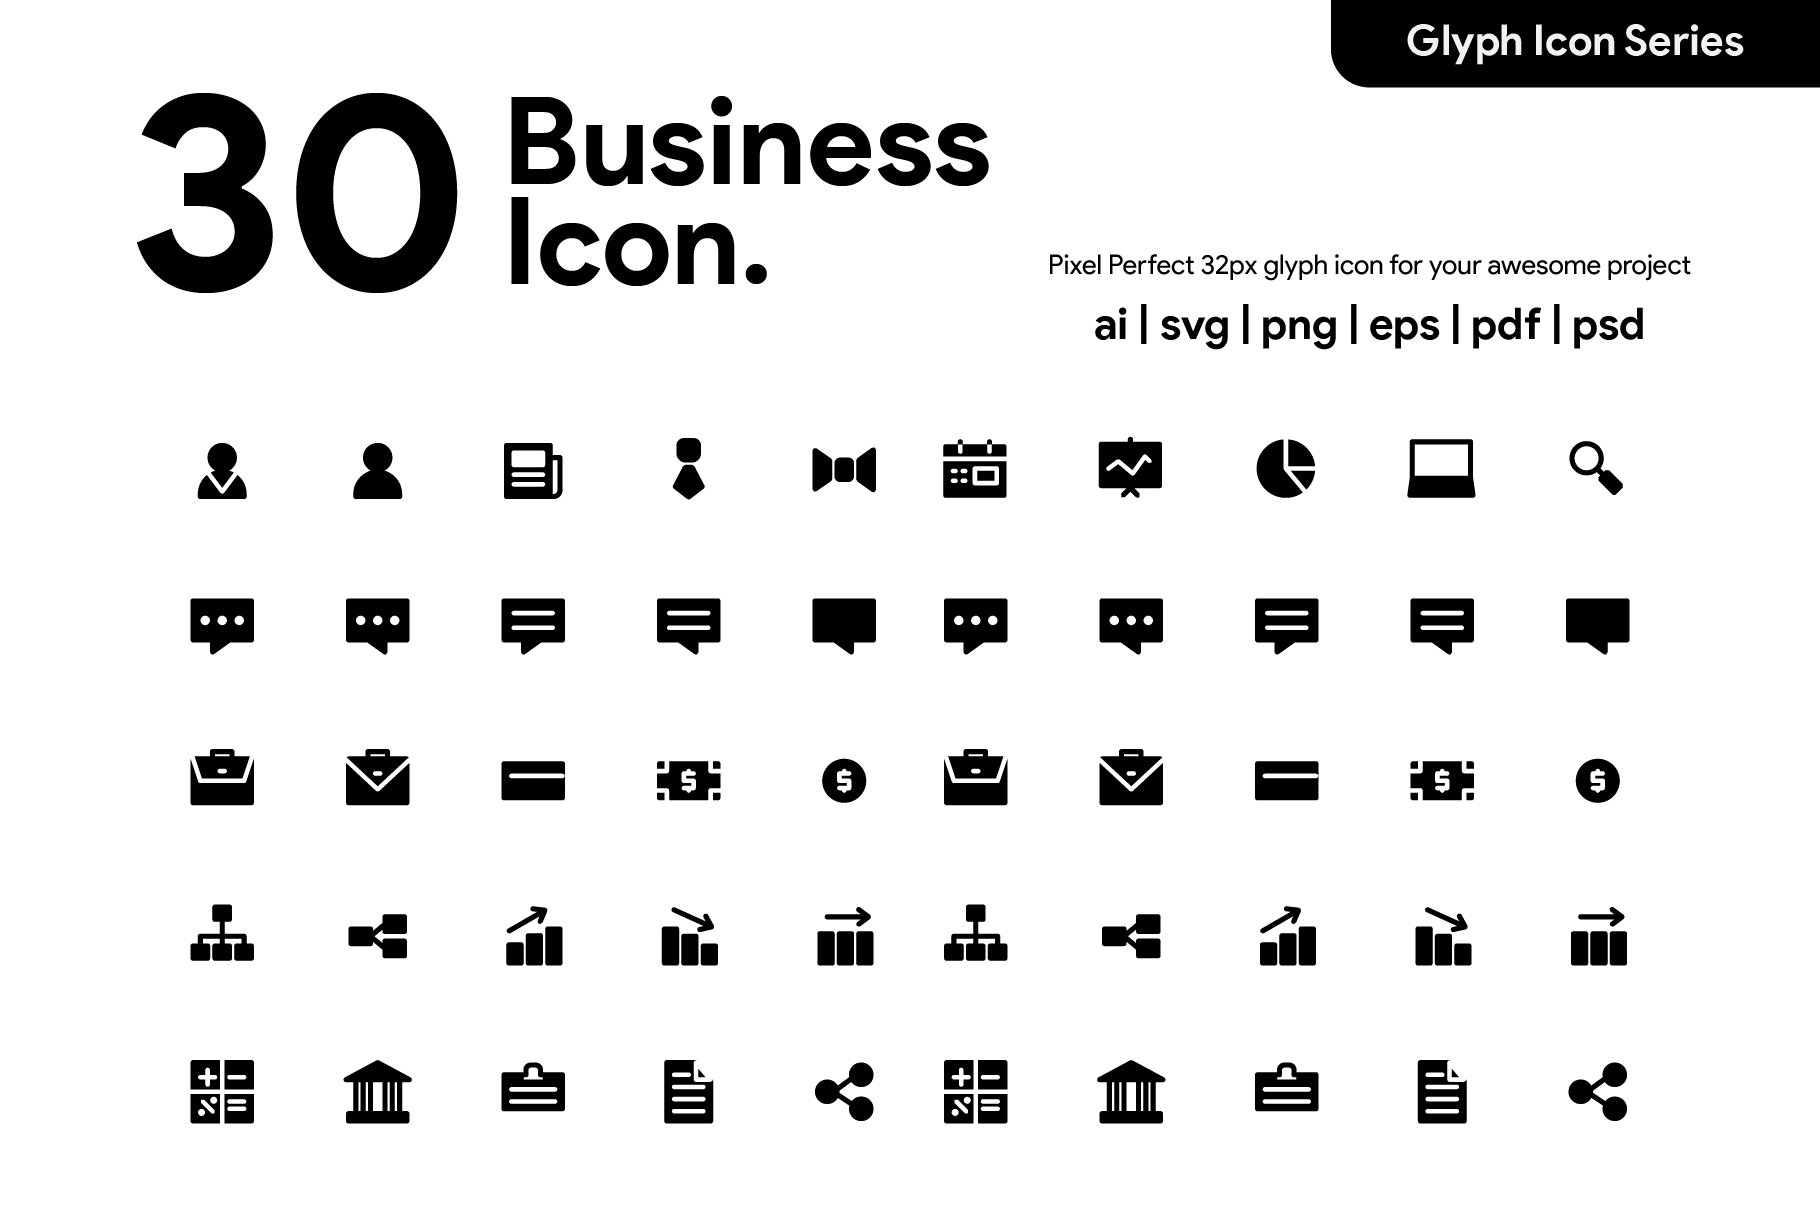 30 Business & Finance Glyph Icon cover image.